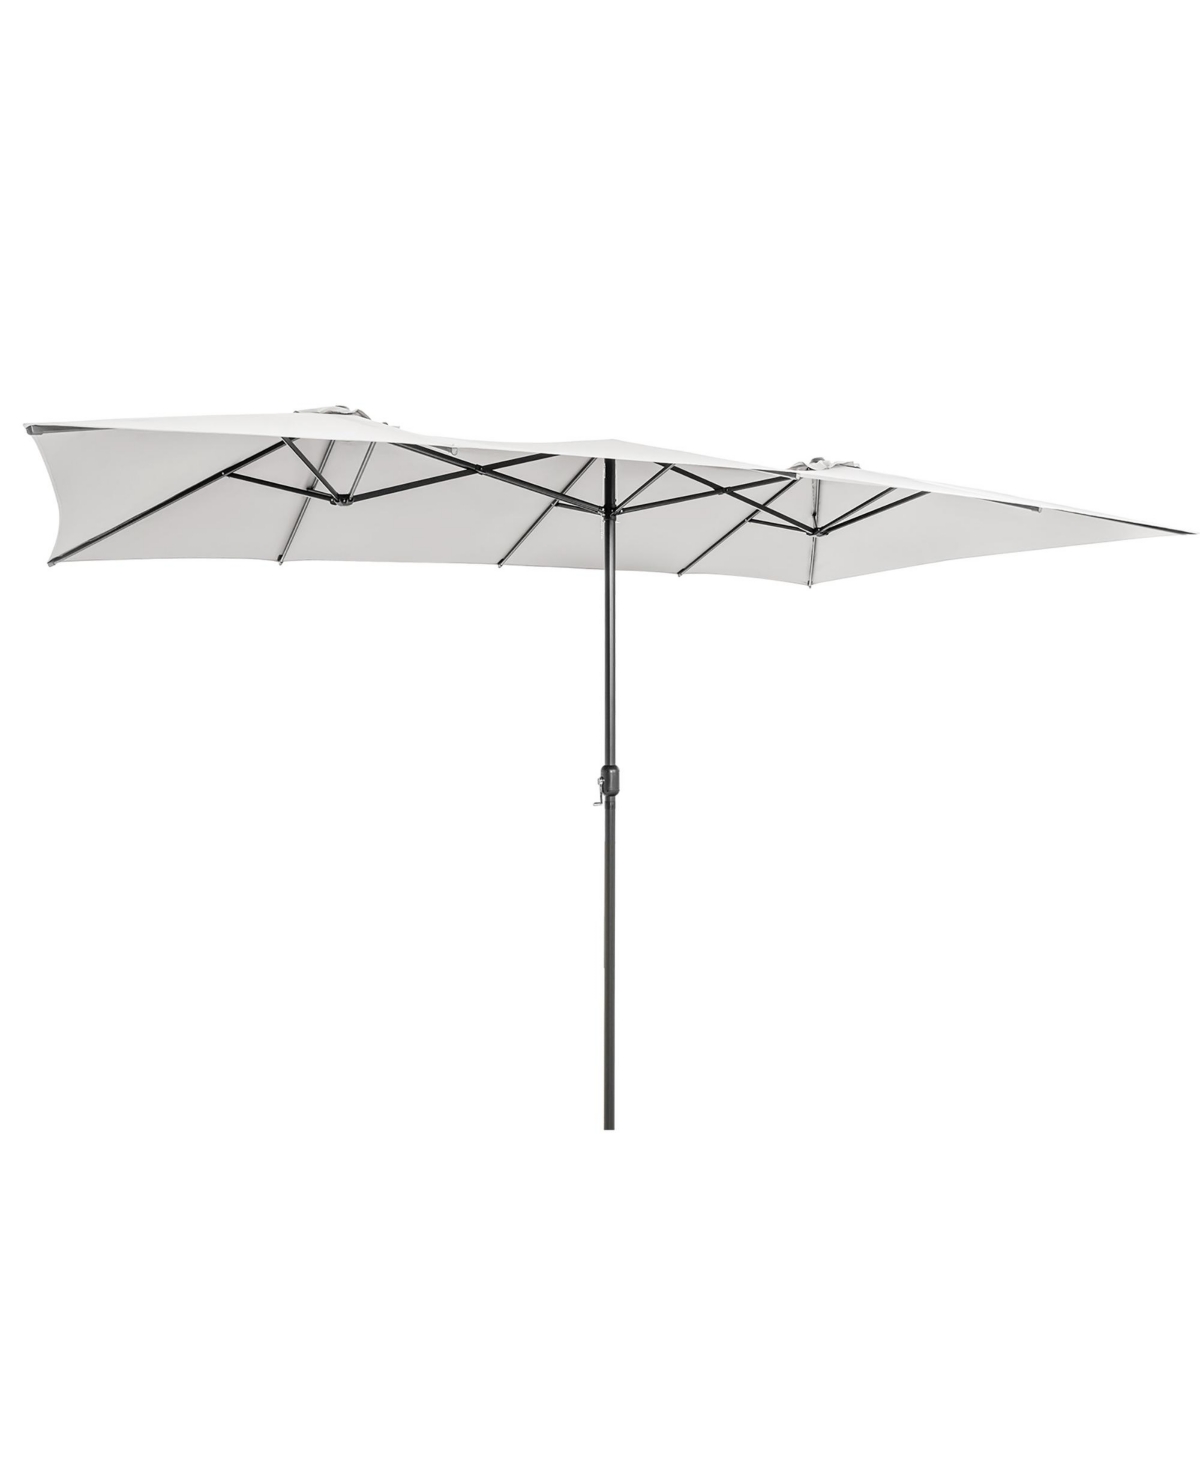 15FT Double-Sided Patio Market Umbrella Large Crank Handle Vented Outdoor Twin - Brown